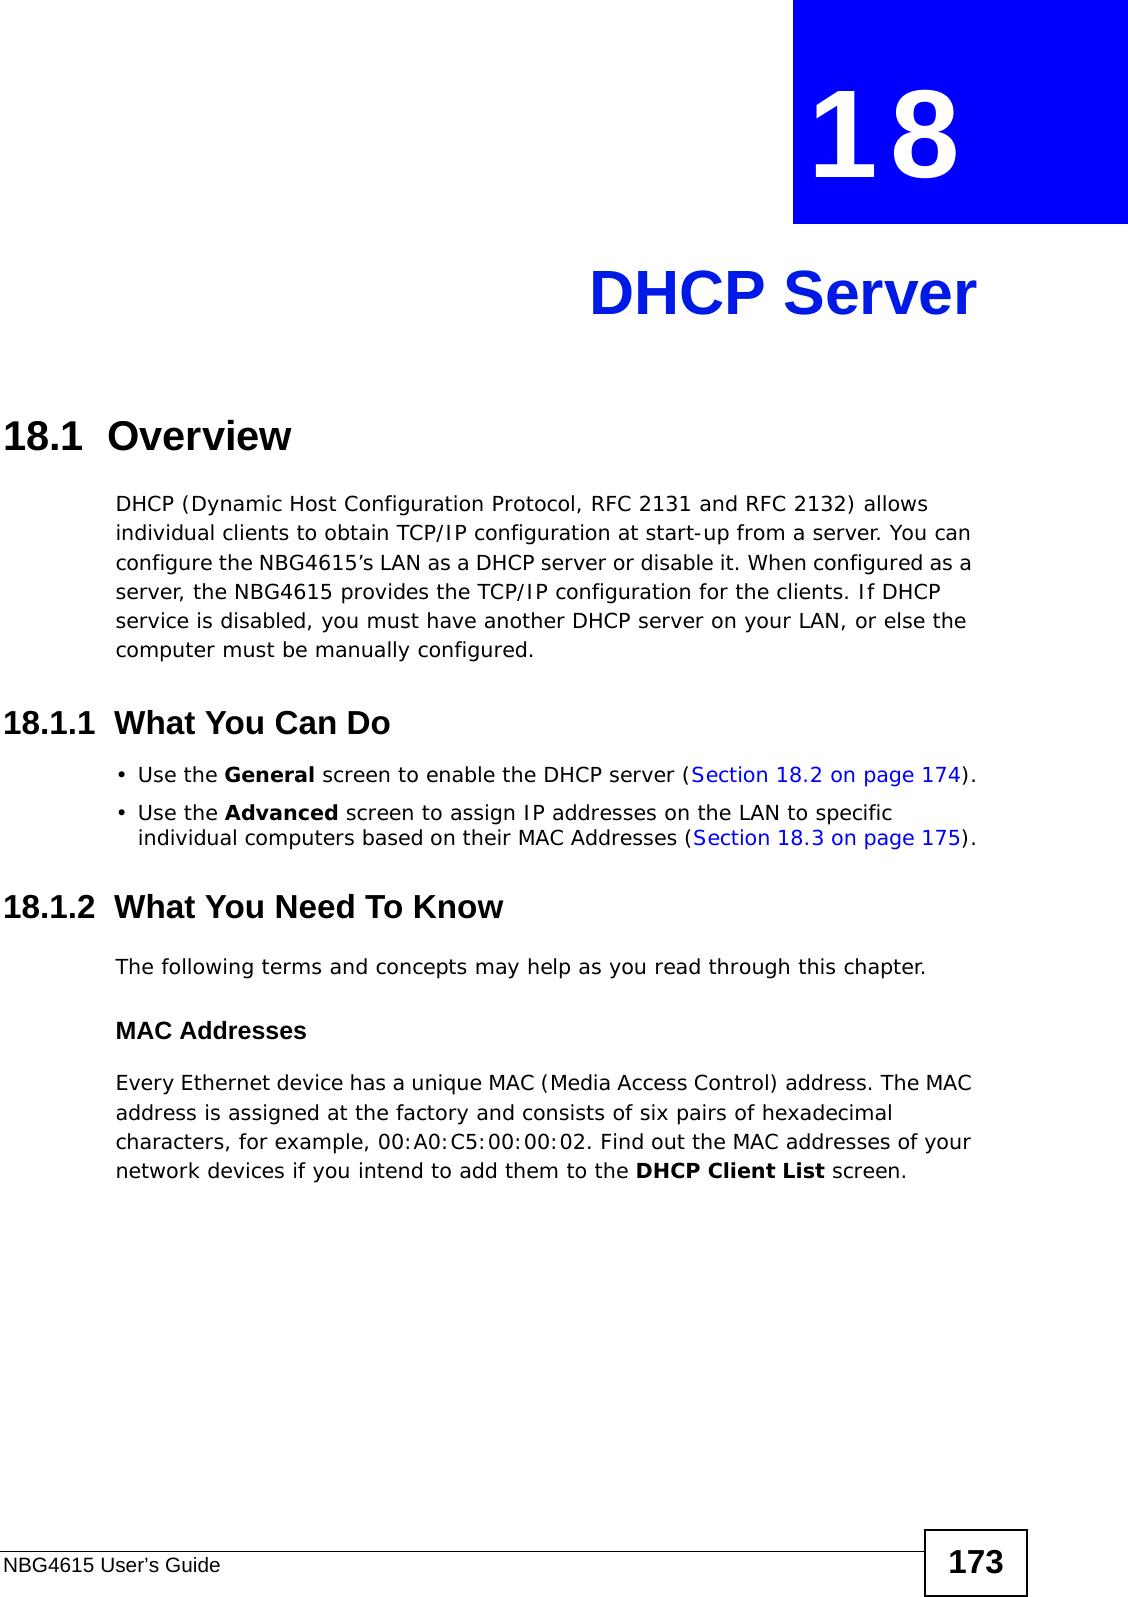 NBG4615 User’s Guide 173CHAPTER  18 DHCP Server18.1  OverviewDHCP (Dynamic Host Configuration Protocol, RFC 2131 and RFC 2132) allows individual clients to obtain TCP/IP configuration at start-up from a server. You can configure the NBG4615’s LAN as a DHCP server or disable it. When configured as a server, the NBG4615 provides the TCP/IP configuration for the clients. If DHCP service is disabled, you must have another DHCP server on your LAN, or else the computer must be manually configured.18.1.1  What You Can Do•Use the General screen to enable the DHCP server (Section 18.2 on page 174).•Use the Advanced screen to assign IP addresses on the LAN to specific individual computers based on their MAC Addresses (Section 18.3 on page 175).18.1.2  What You Need To KnowThe following terms and concepts may help as you read through this chapter.MAC AddressesEvery Ethernet device has a unique MAC (Media Access Control) address. The MAC address is assigned at the factory and consists of six pairs of hexadecimal characters, for example, 00:A0:C5:00:00:02. Find out the MAC addresses of your network devices if you intend to add them to the DHCP Client List screen.